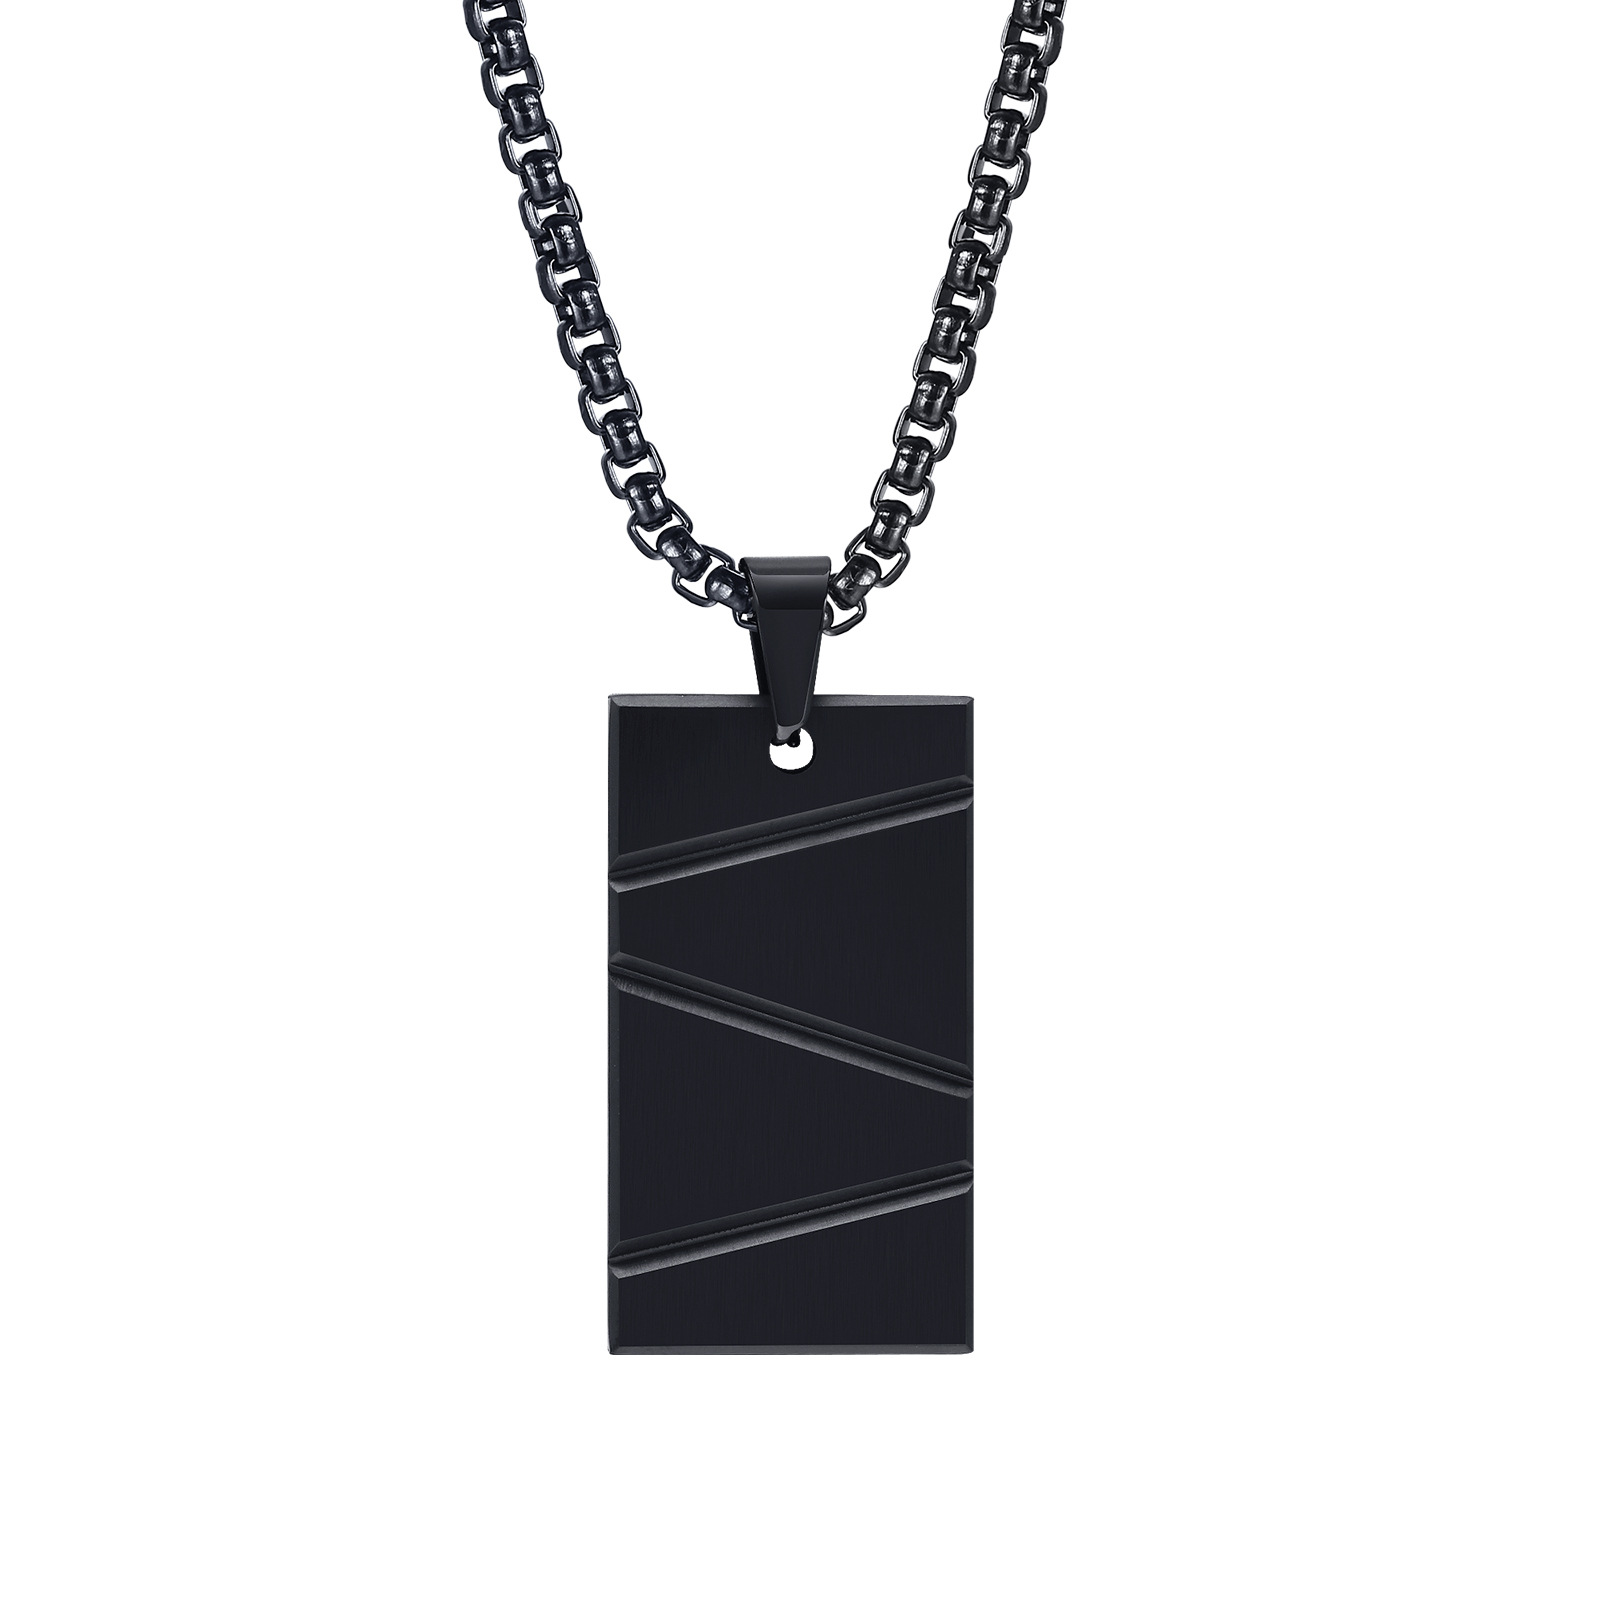 3:Black pendant without chain